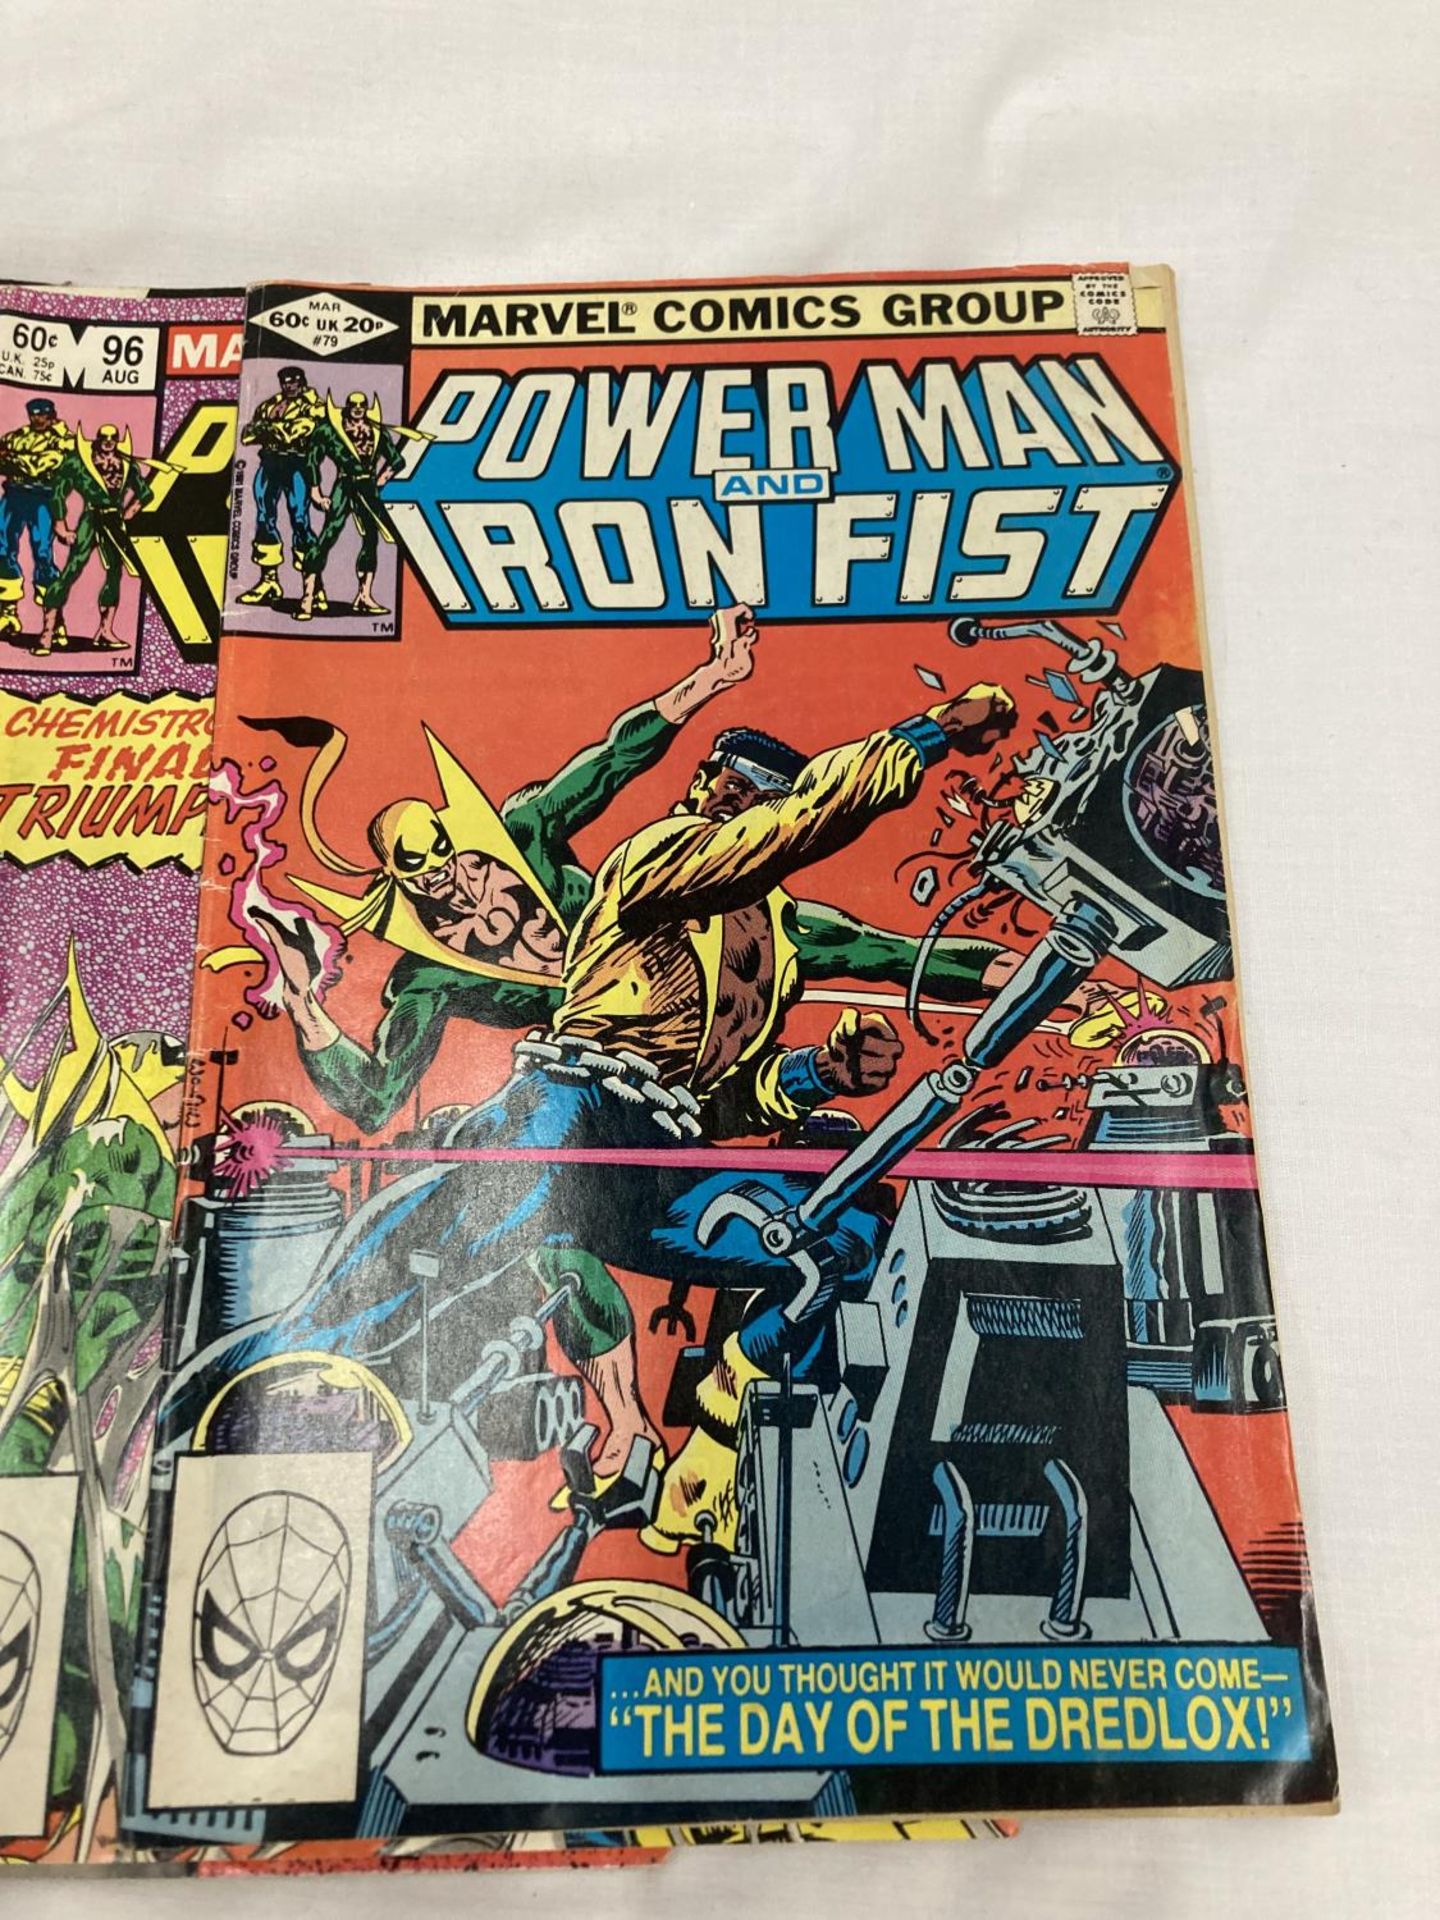 FIVE VINTAGE MARVEL POWERMAN AND IRON FISH COMICS FROM THE 1970'S - Image 3 of 14